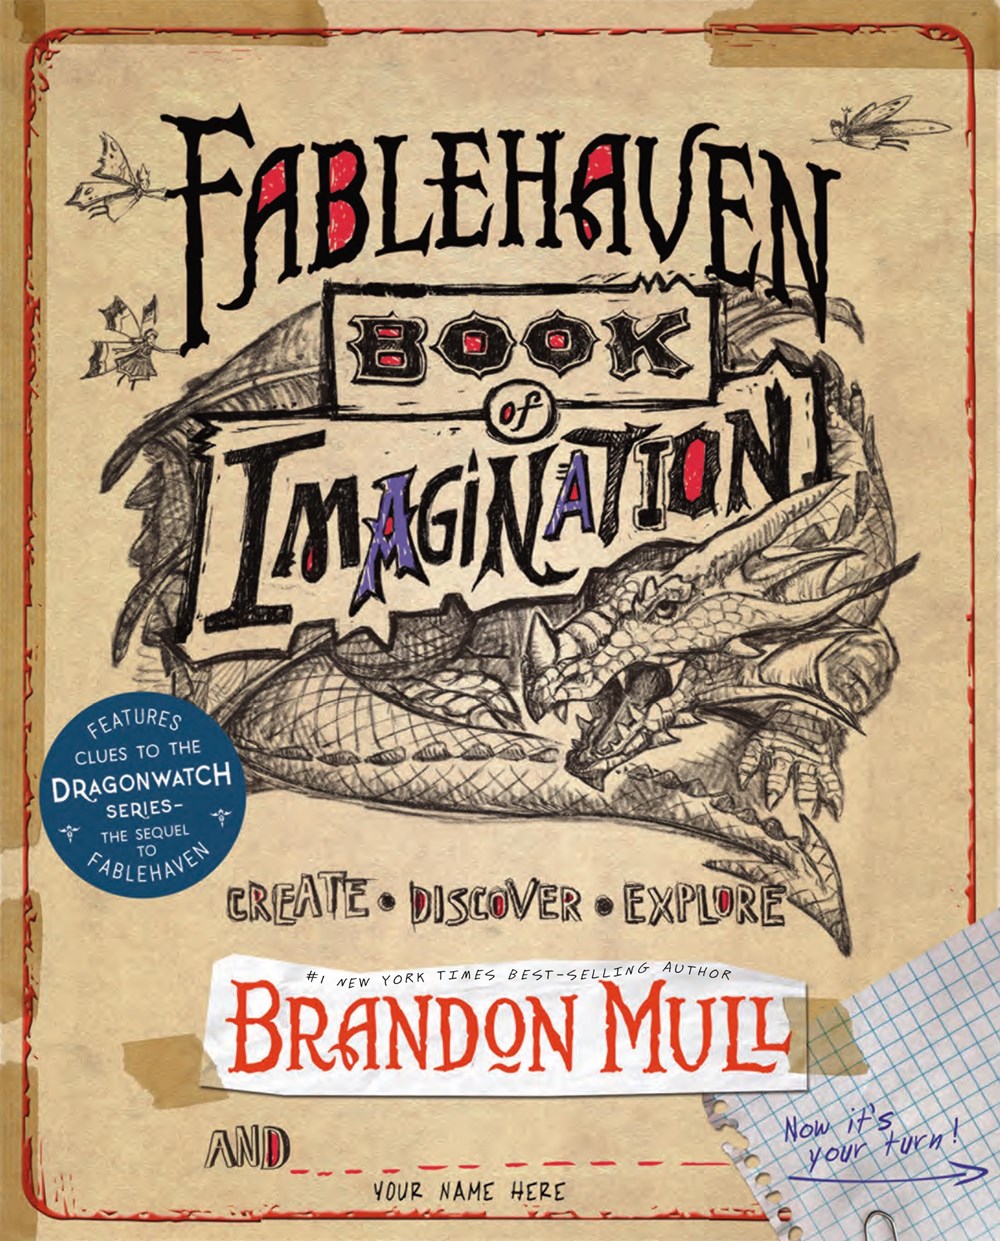 Fablehaven Book of Imagination 